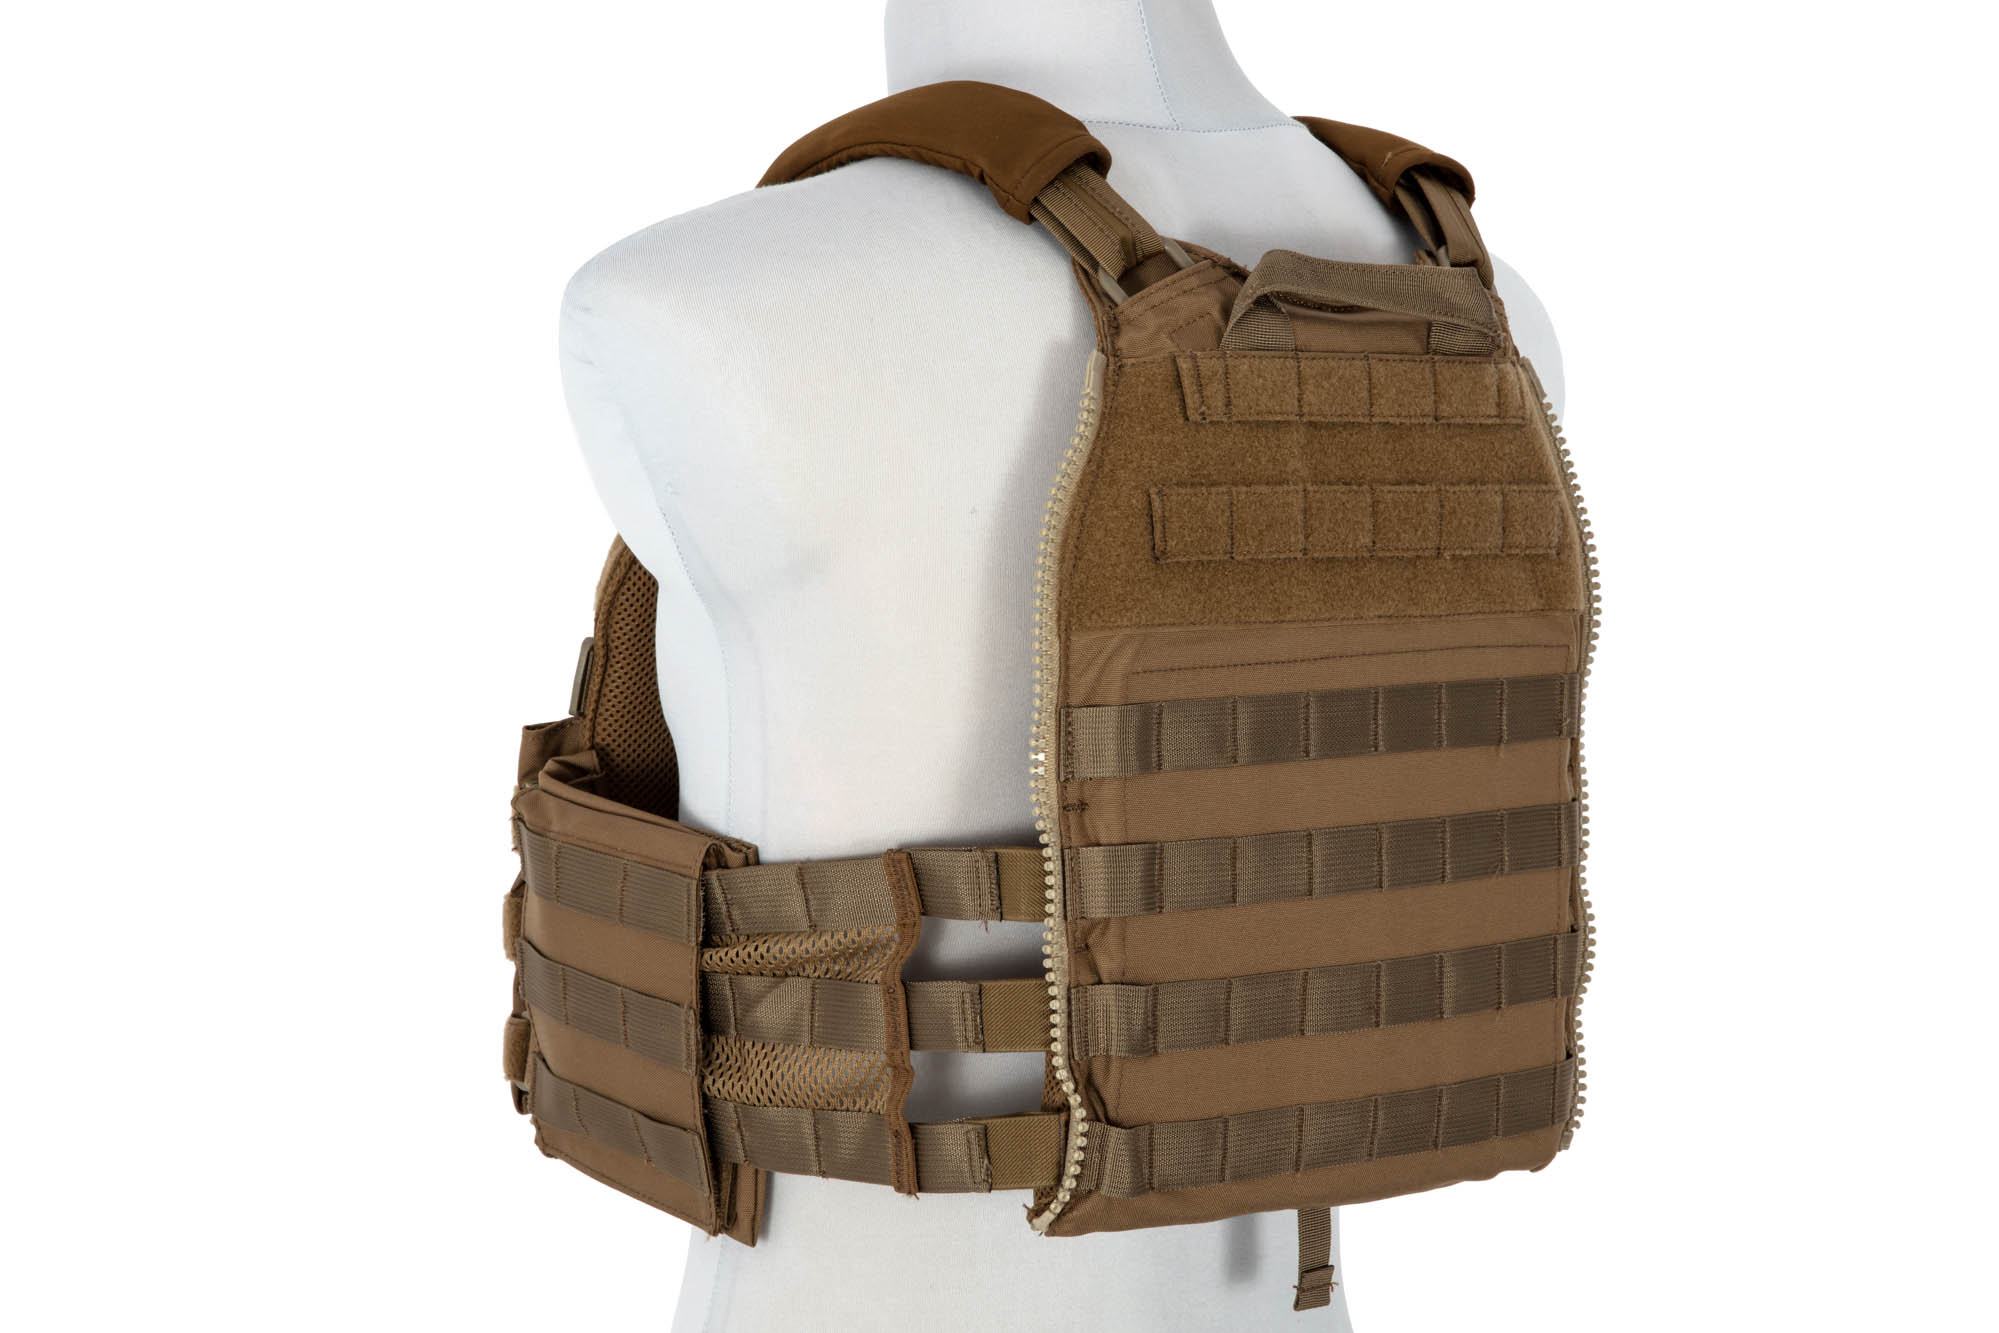 VS Style SCRB Tactical Vest - Coyote Brown